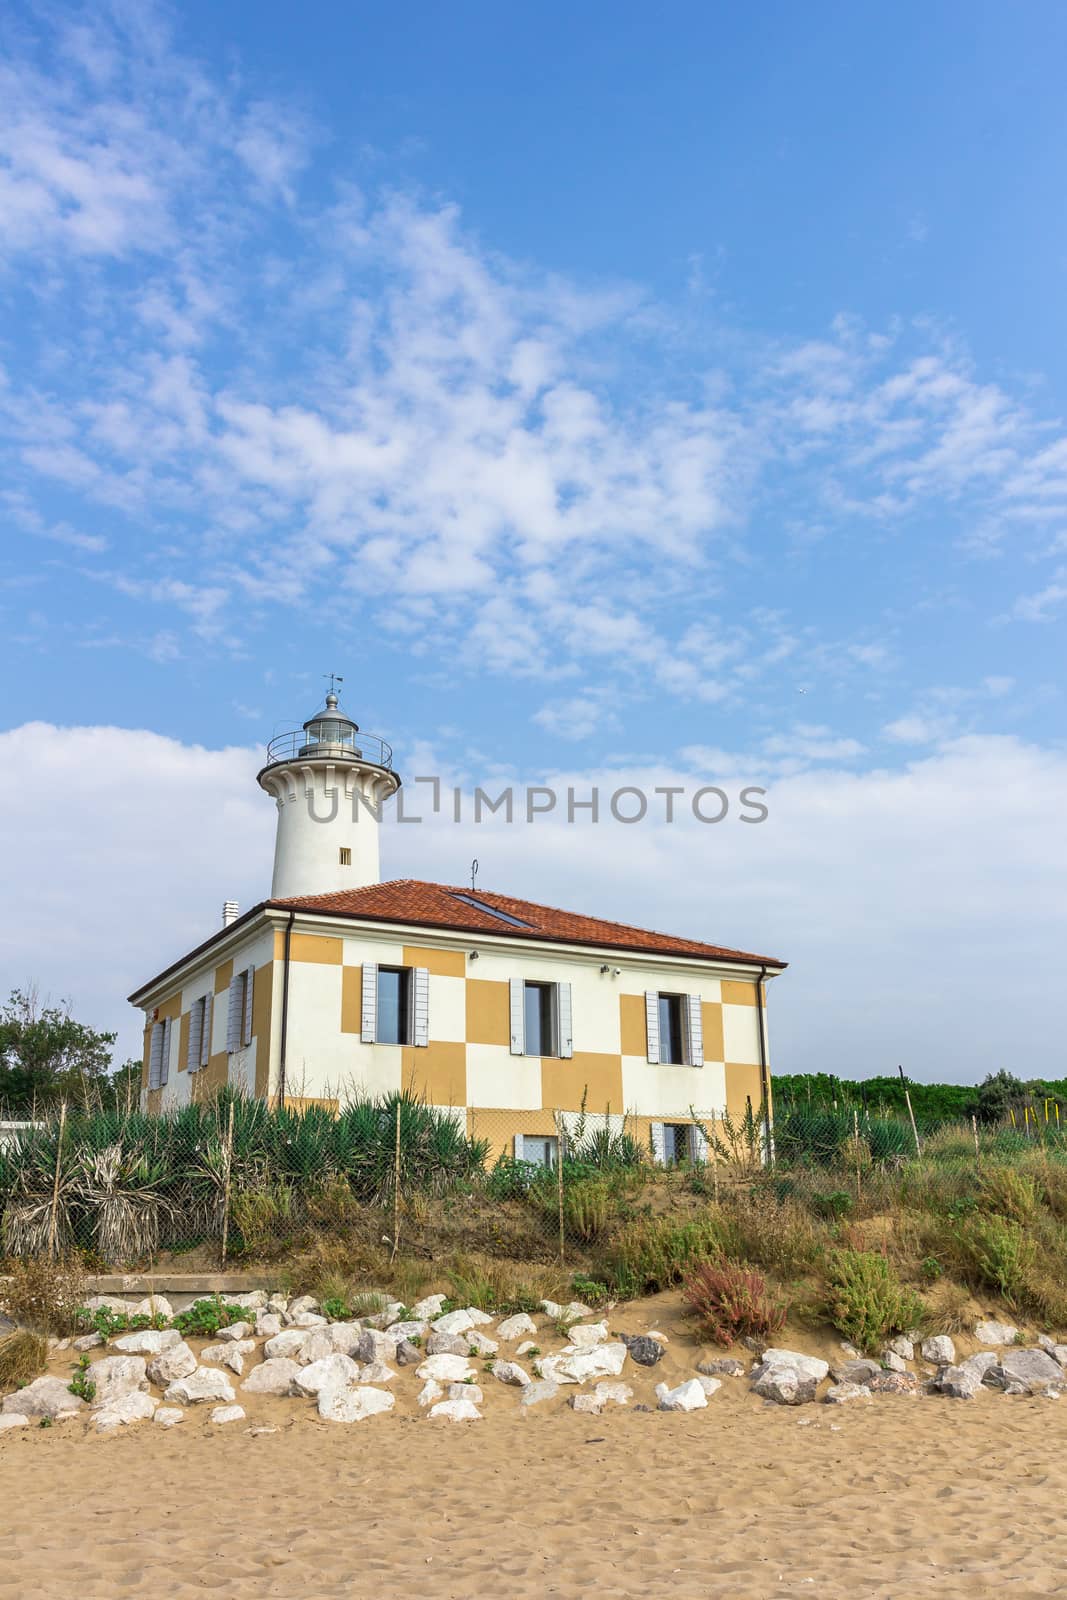 Lighthouse of Bibione by germanopoli